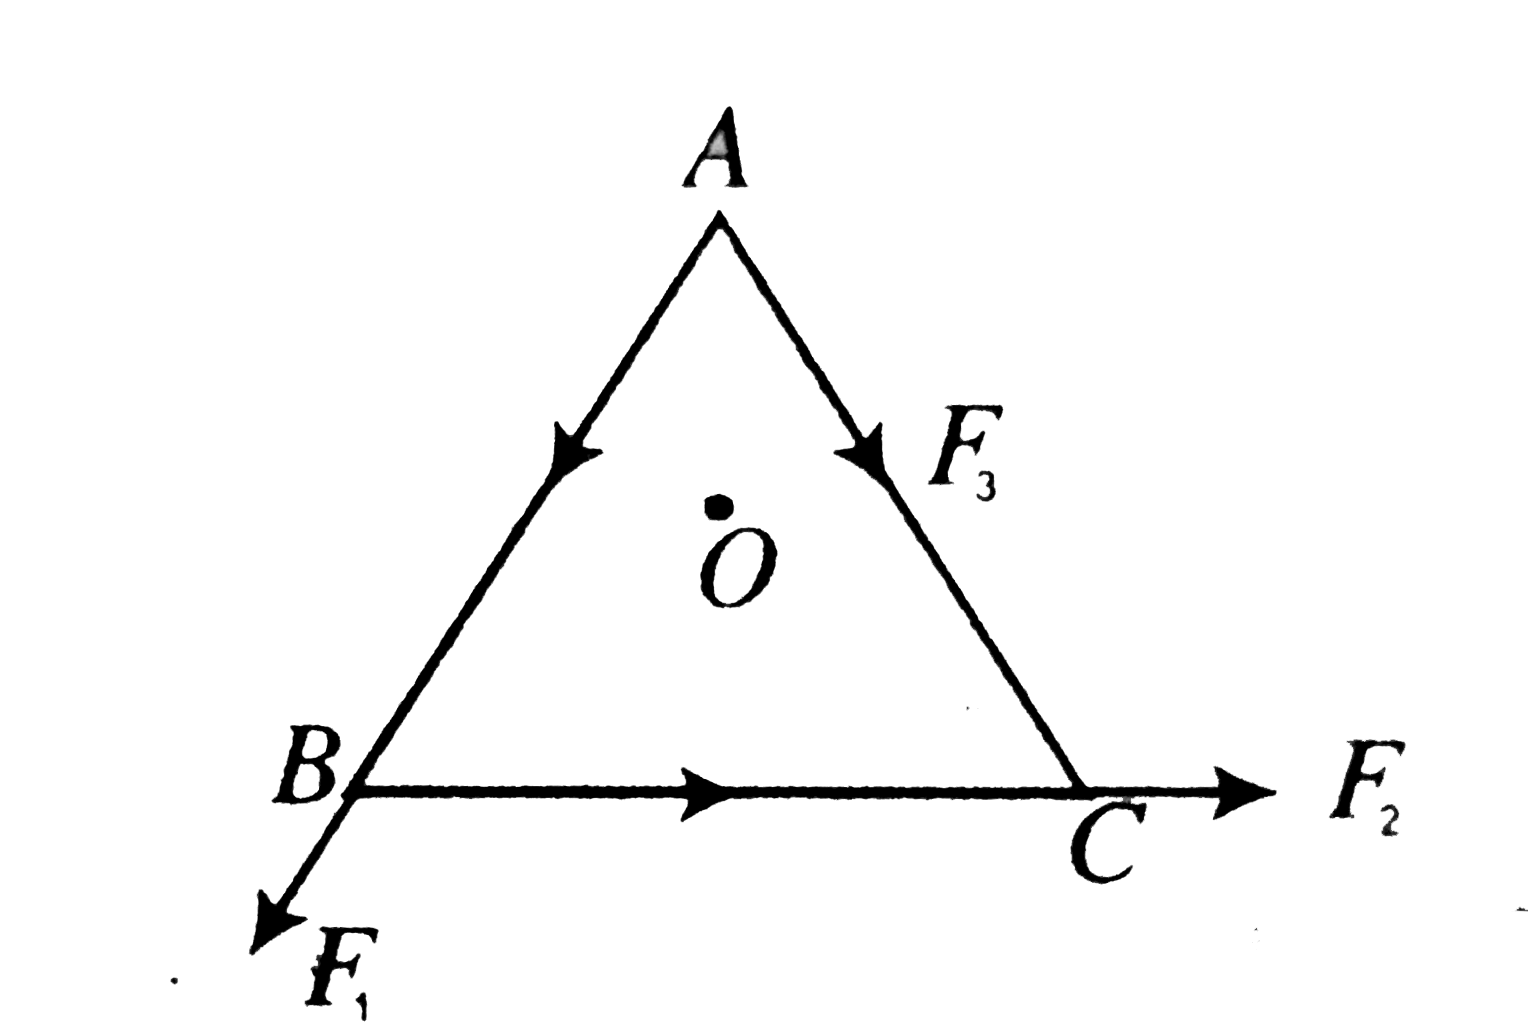 O is the centre of an equilateral triangle ABC. F(1), F(2) and F(3) are the three forces acting along the sides AB, BC and AC respectively. What should be the value of F(3) so that the total torque about O is zero?